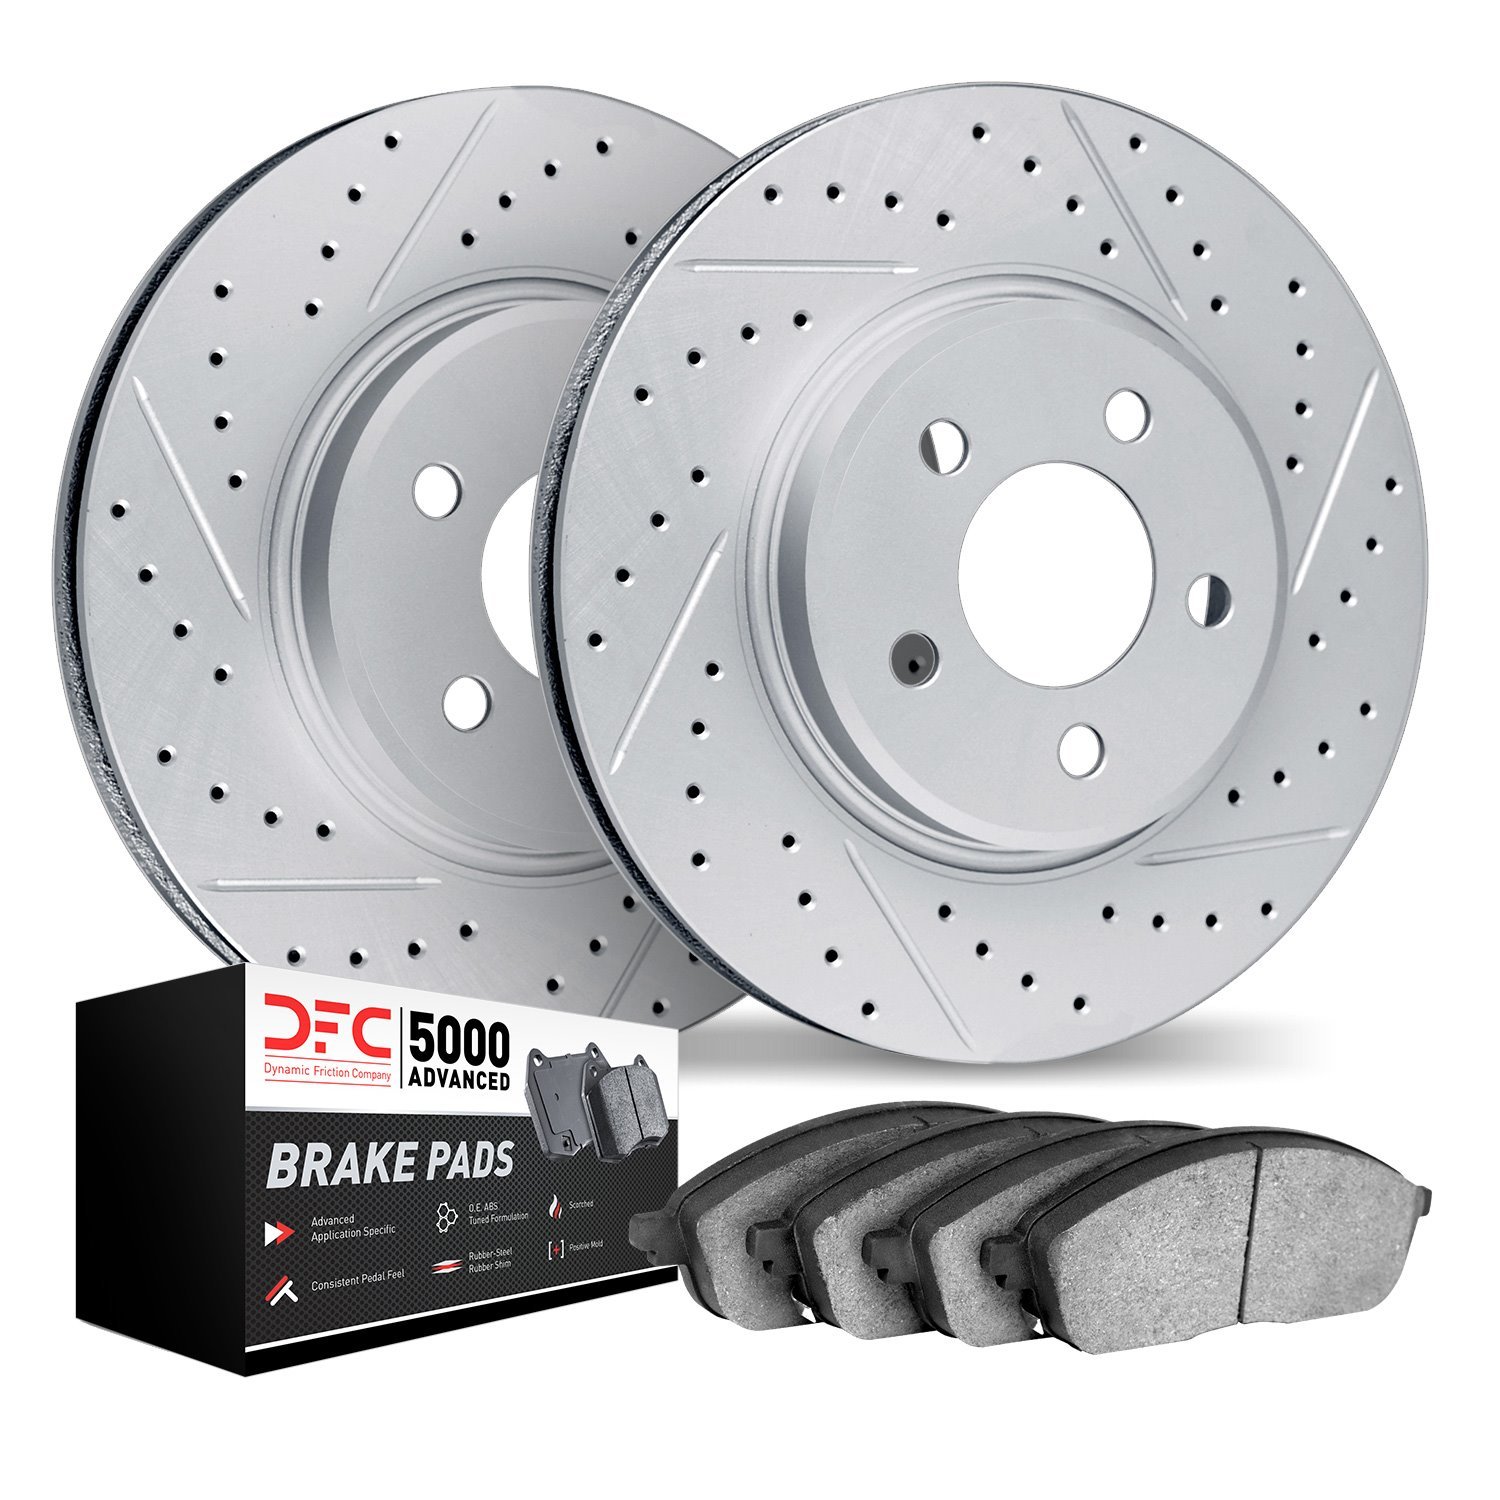 2502-63018 Geoperformance Drilled/Slotted Rotors w/5000 Advanced Brake Pads Kit, 1998-2009 Multiple Makes/Models, Position: Rear